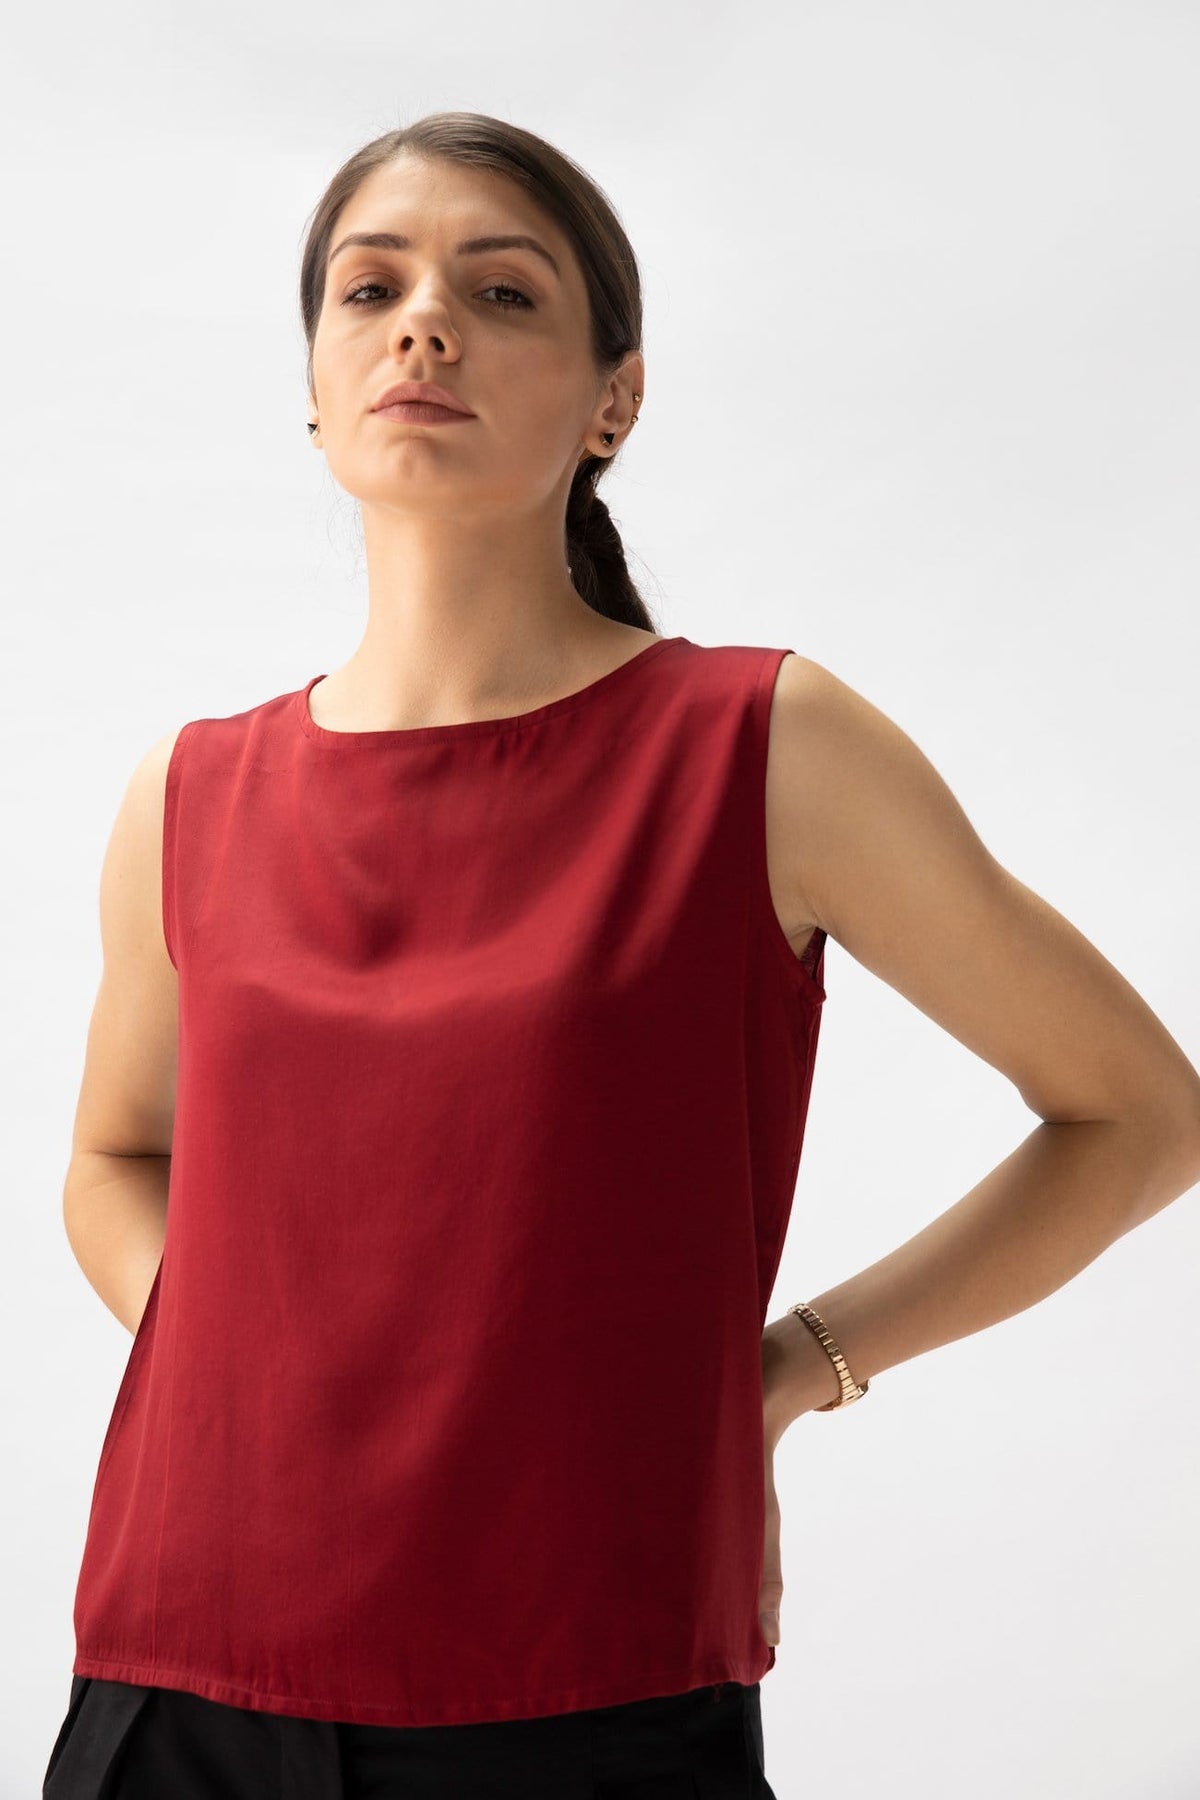 Saltpetre womens wear, indo-western shell top for semi formal, casual, occassional wear. Comfortably elegant woth delivate feminine straps in maroon red colour.